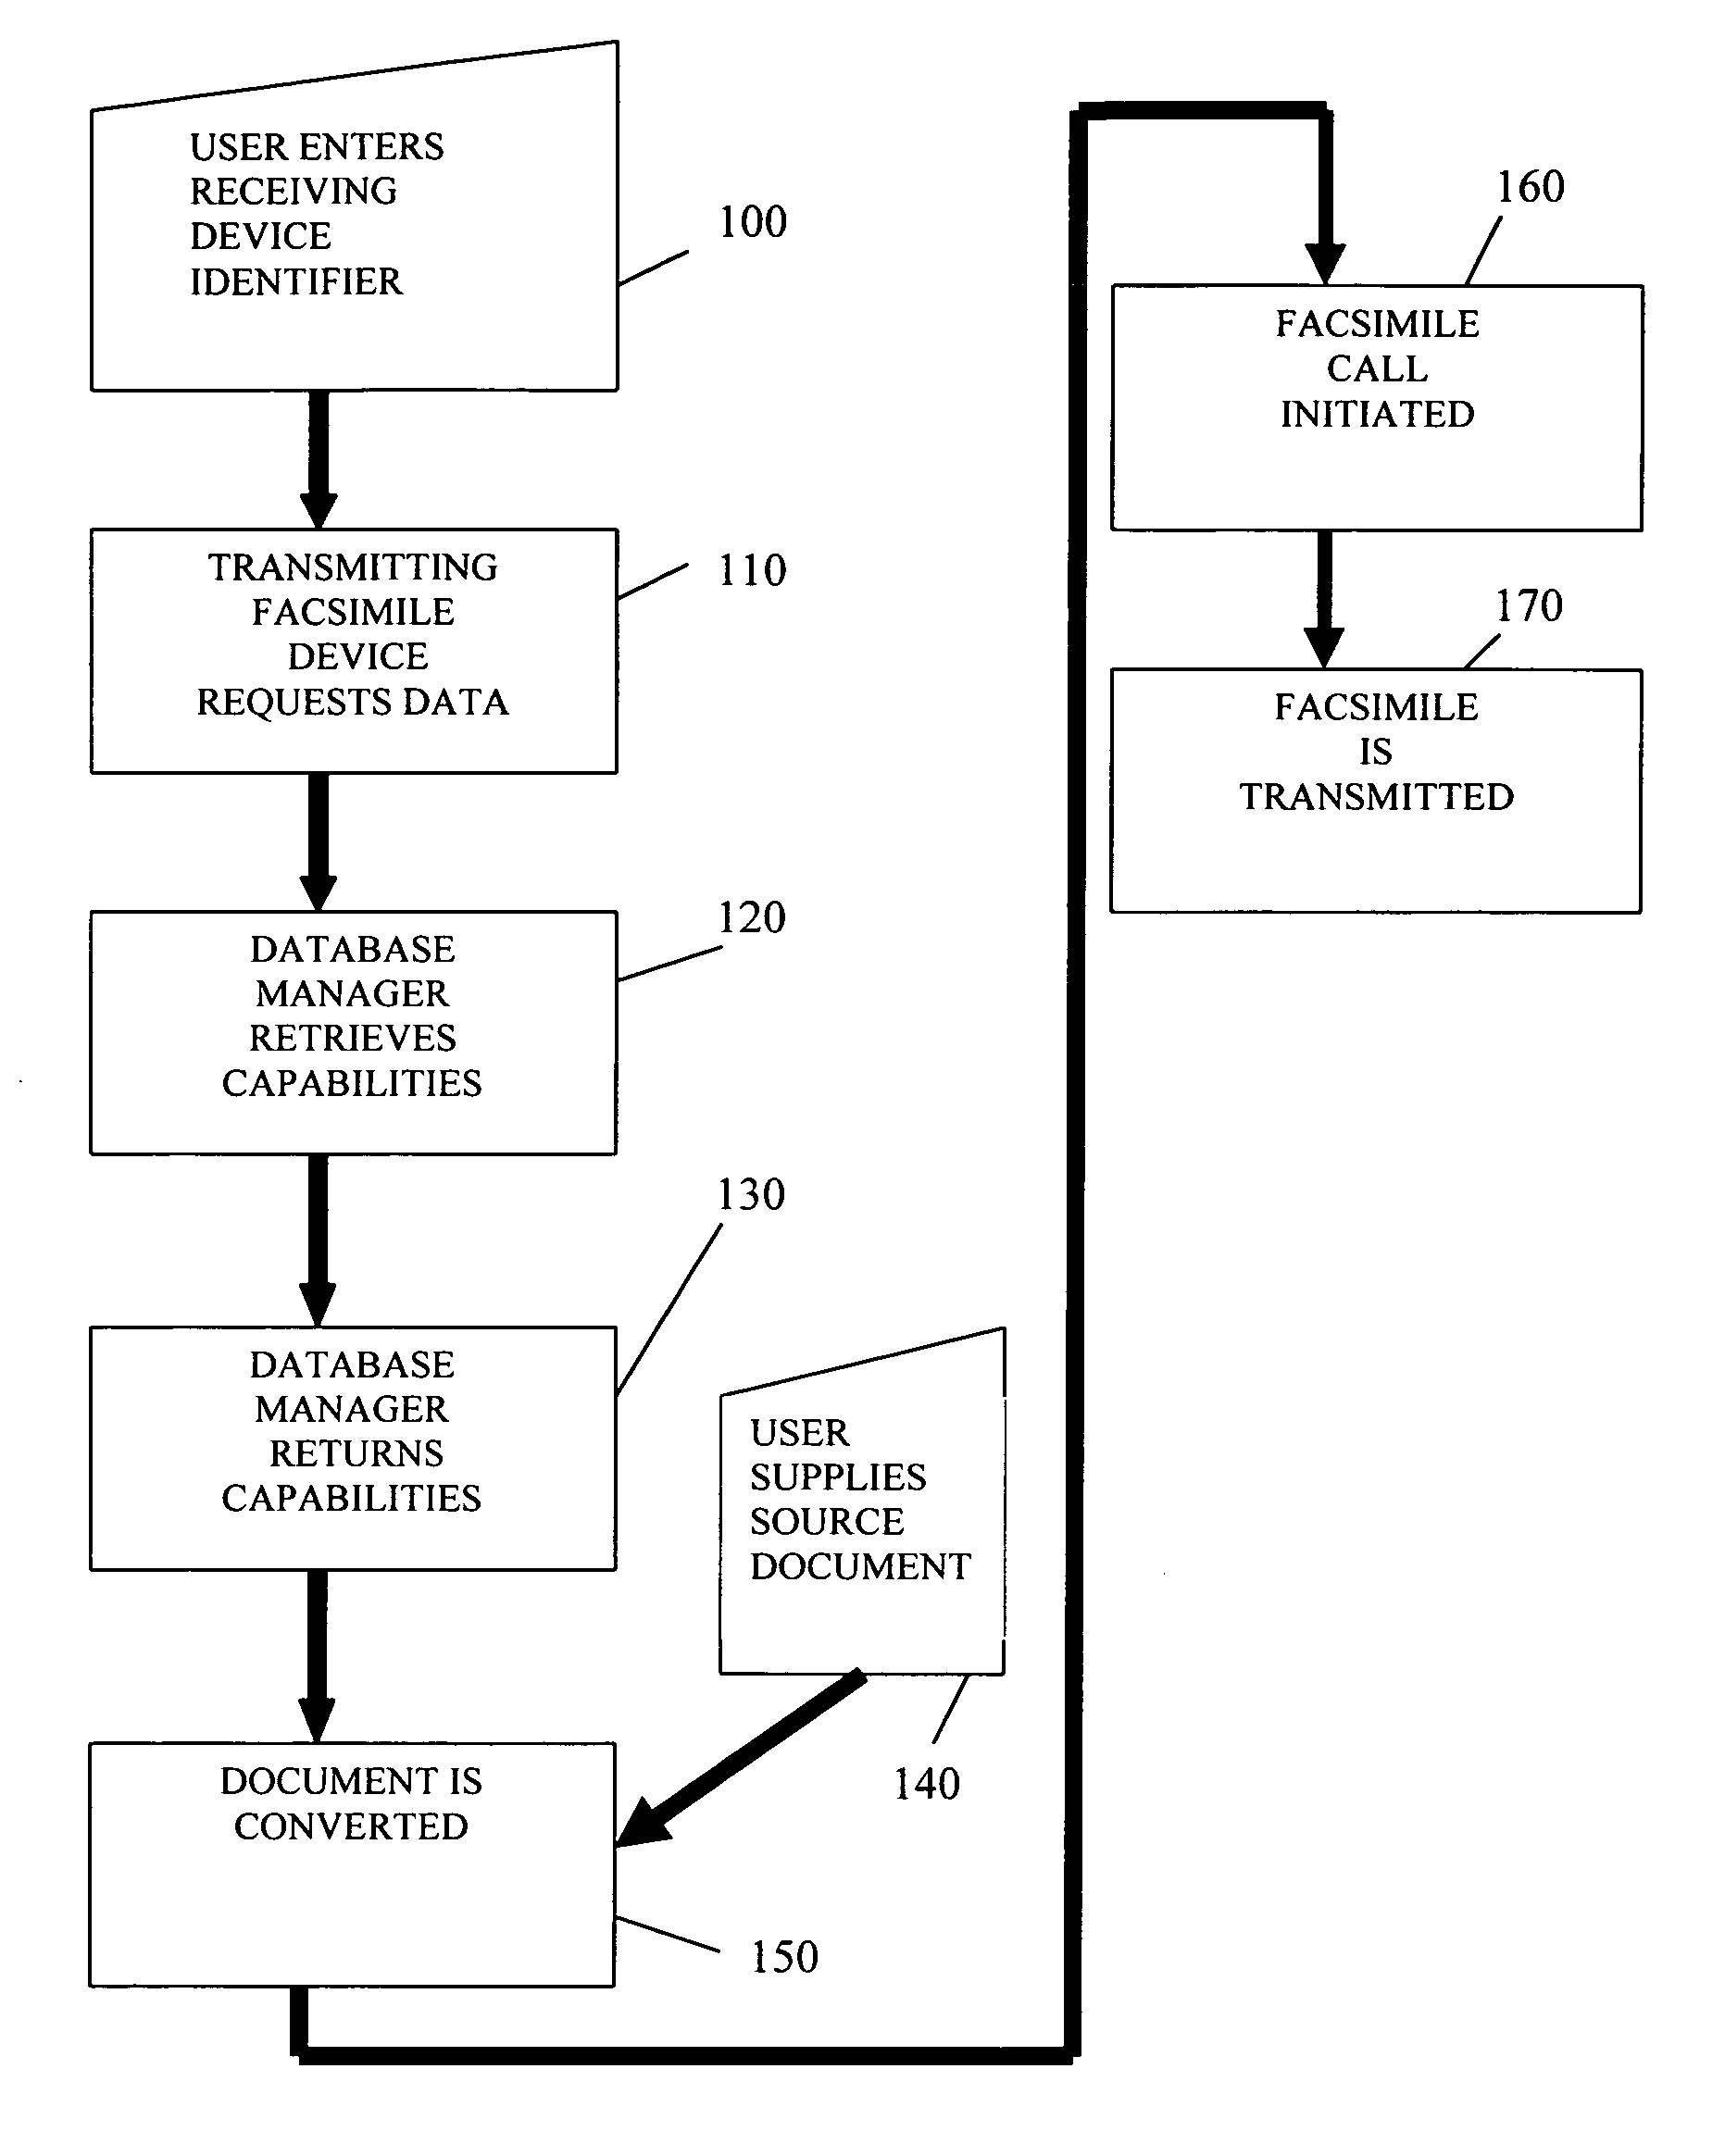 Systems and methods for determining user preferences and/or facsimile device capabilities before call initiation